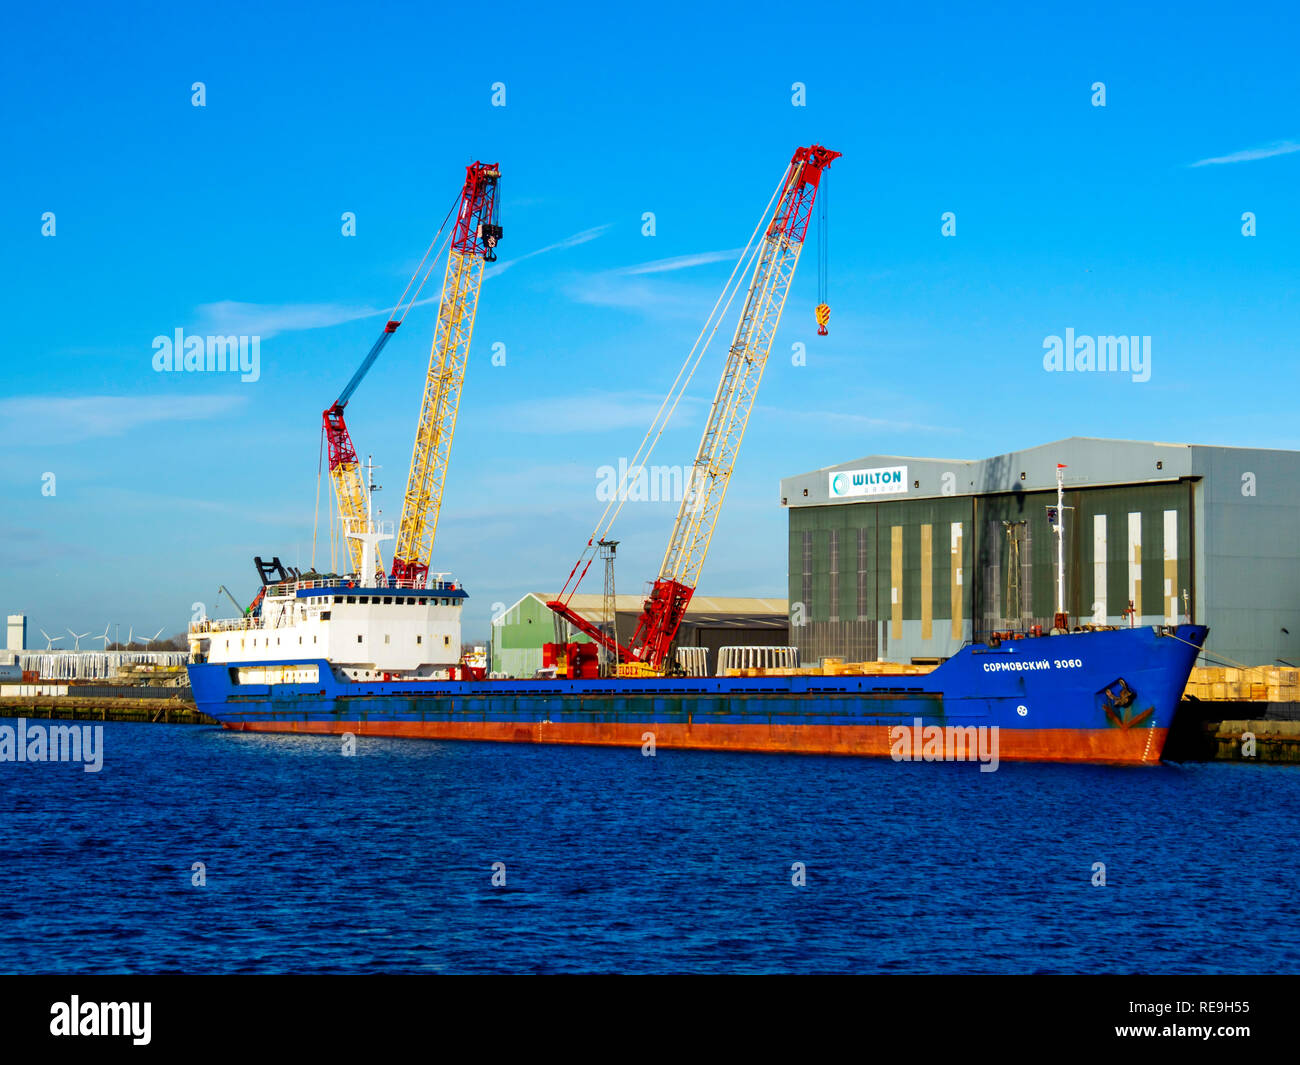 Russian cargo ship Sormovsky 3080 moored on the quayside at Wilton Group fabrication yard at Port Clarnce on the River Tees Stock Photo